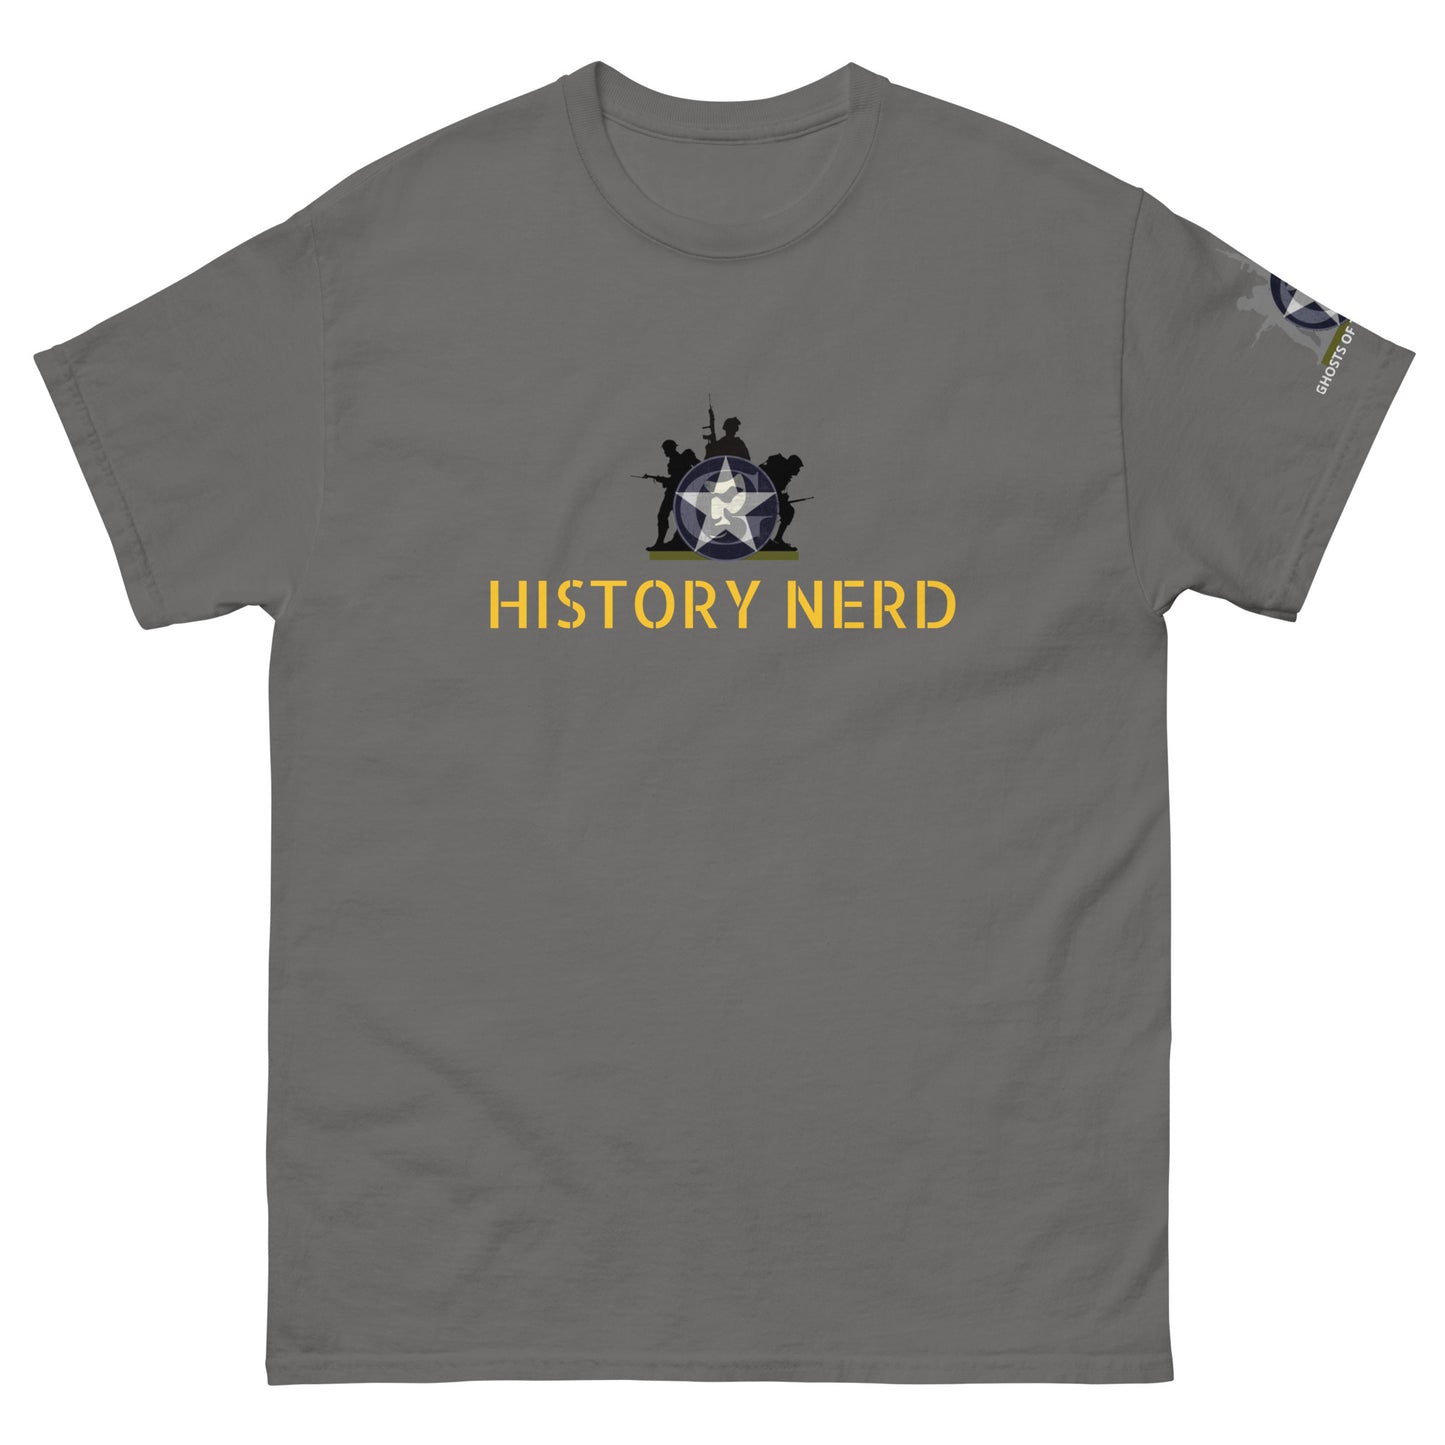 Ghosts of the Battlefied "History Nerd" T-Shirt